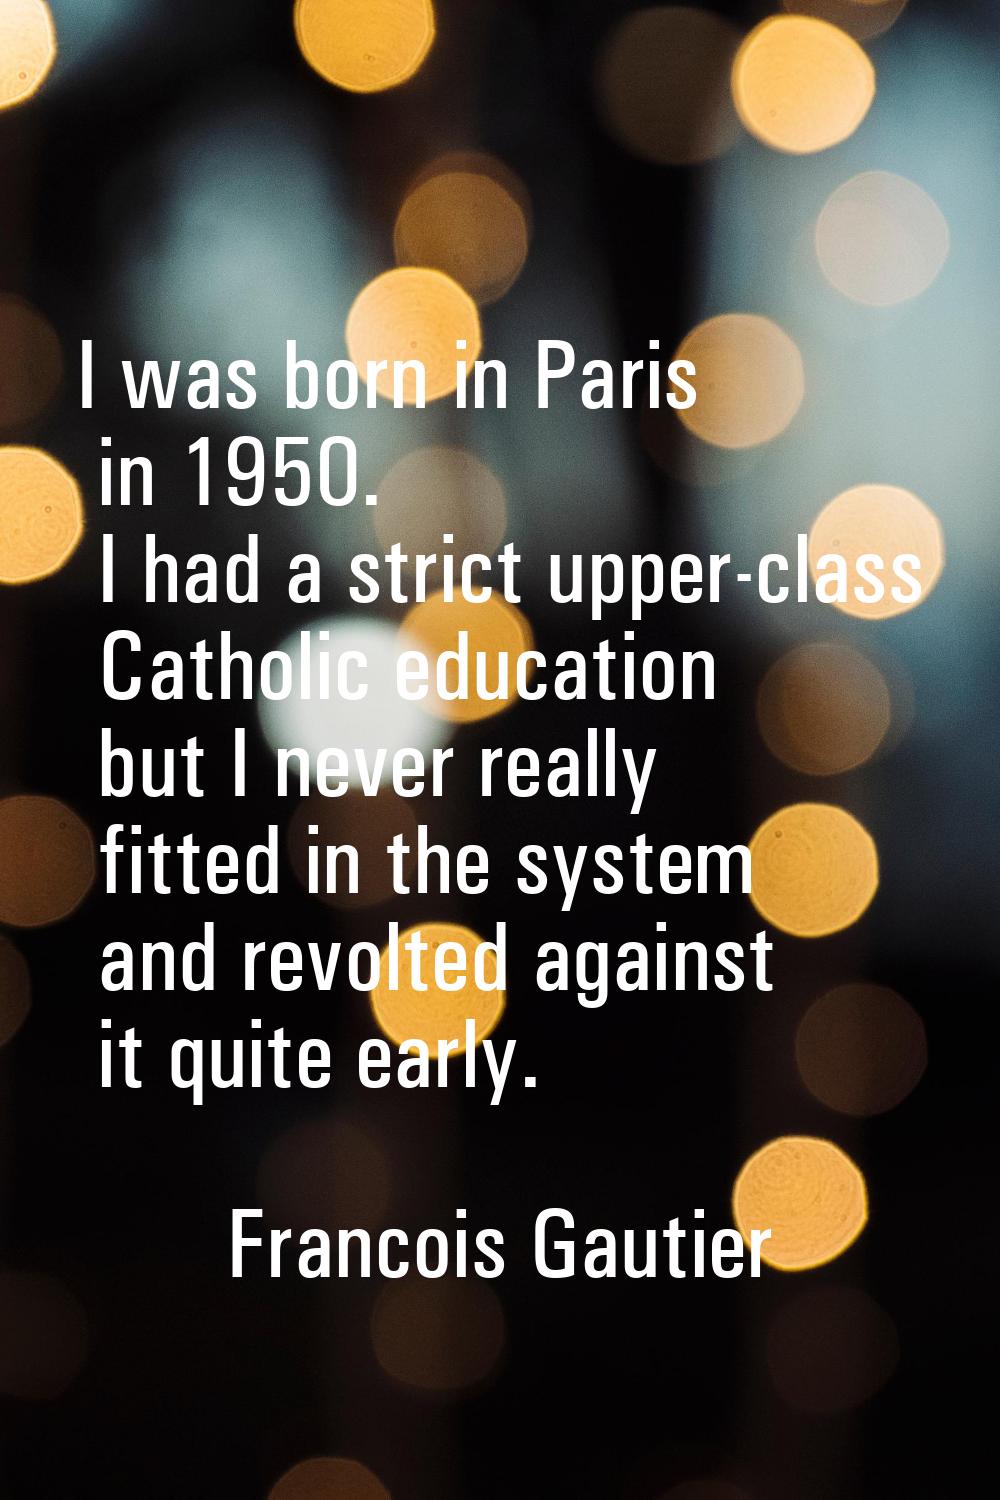 I was born in Paris in 1950. I had a strict upper-class Catholic education but I never really fitte